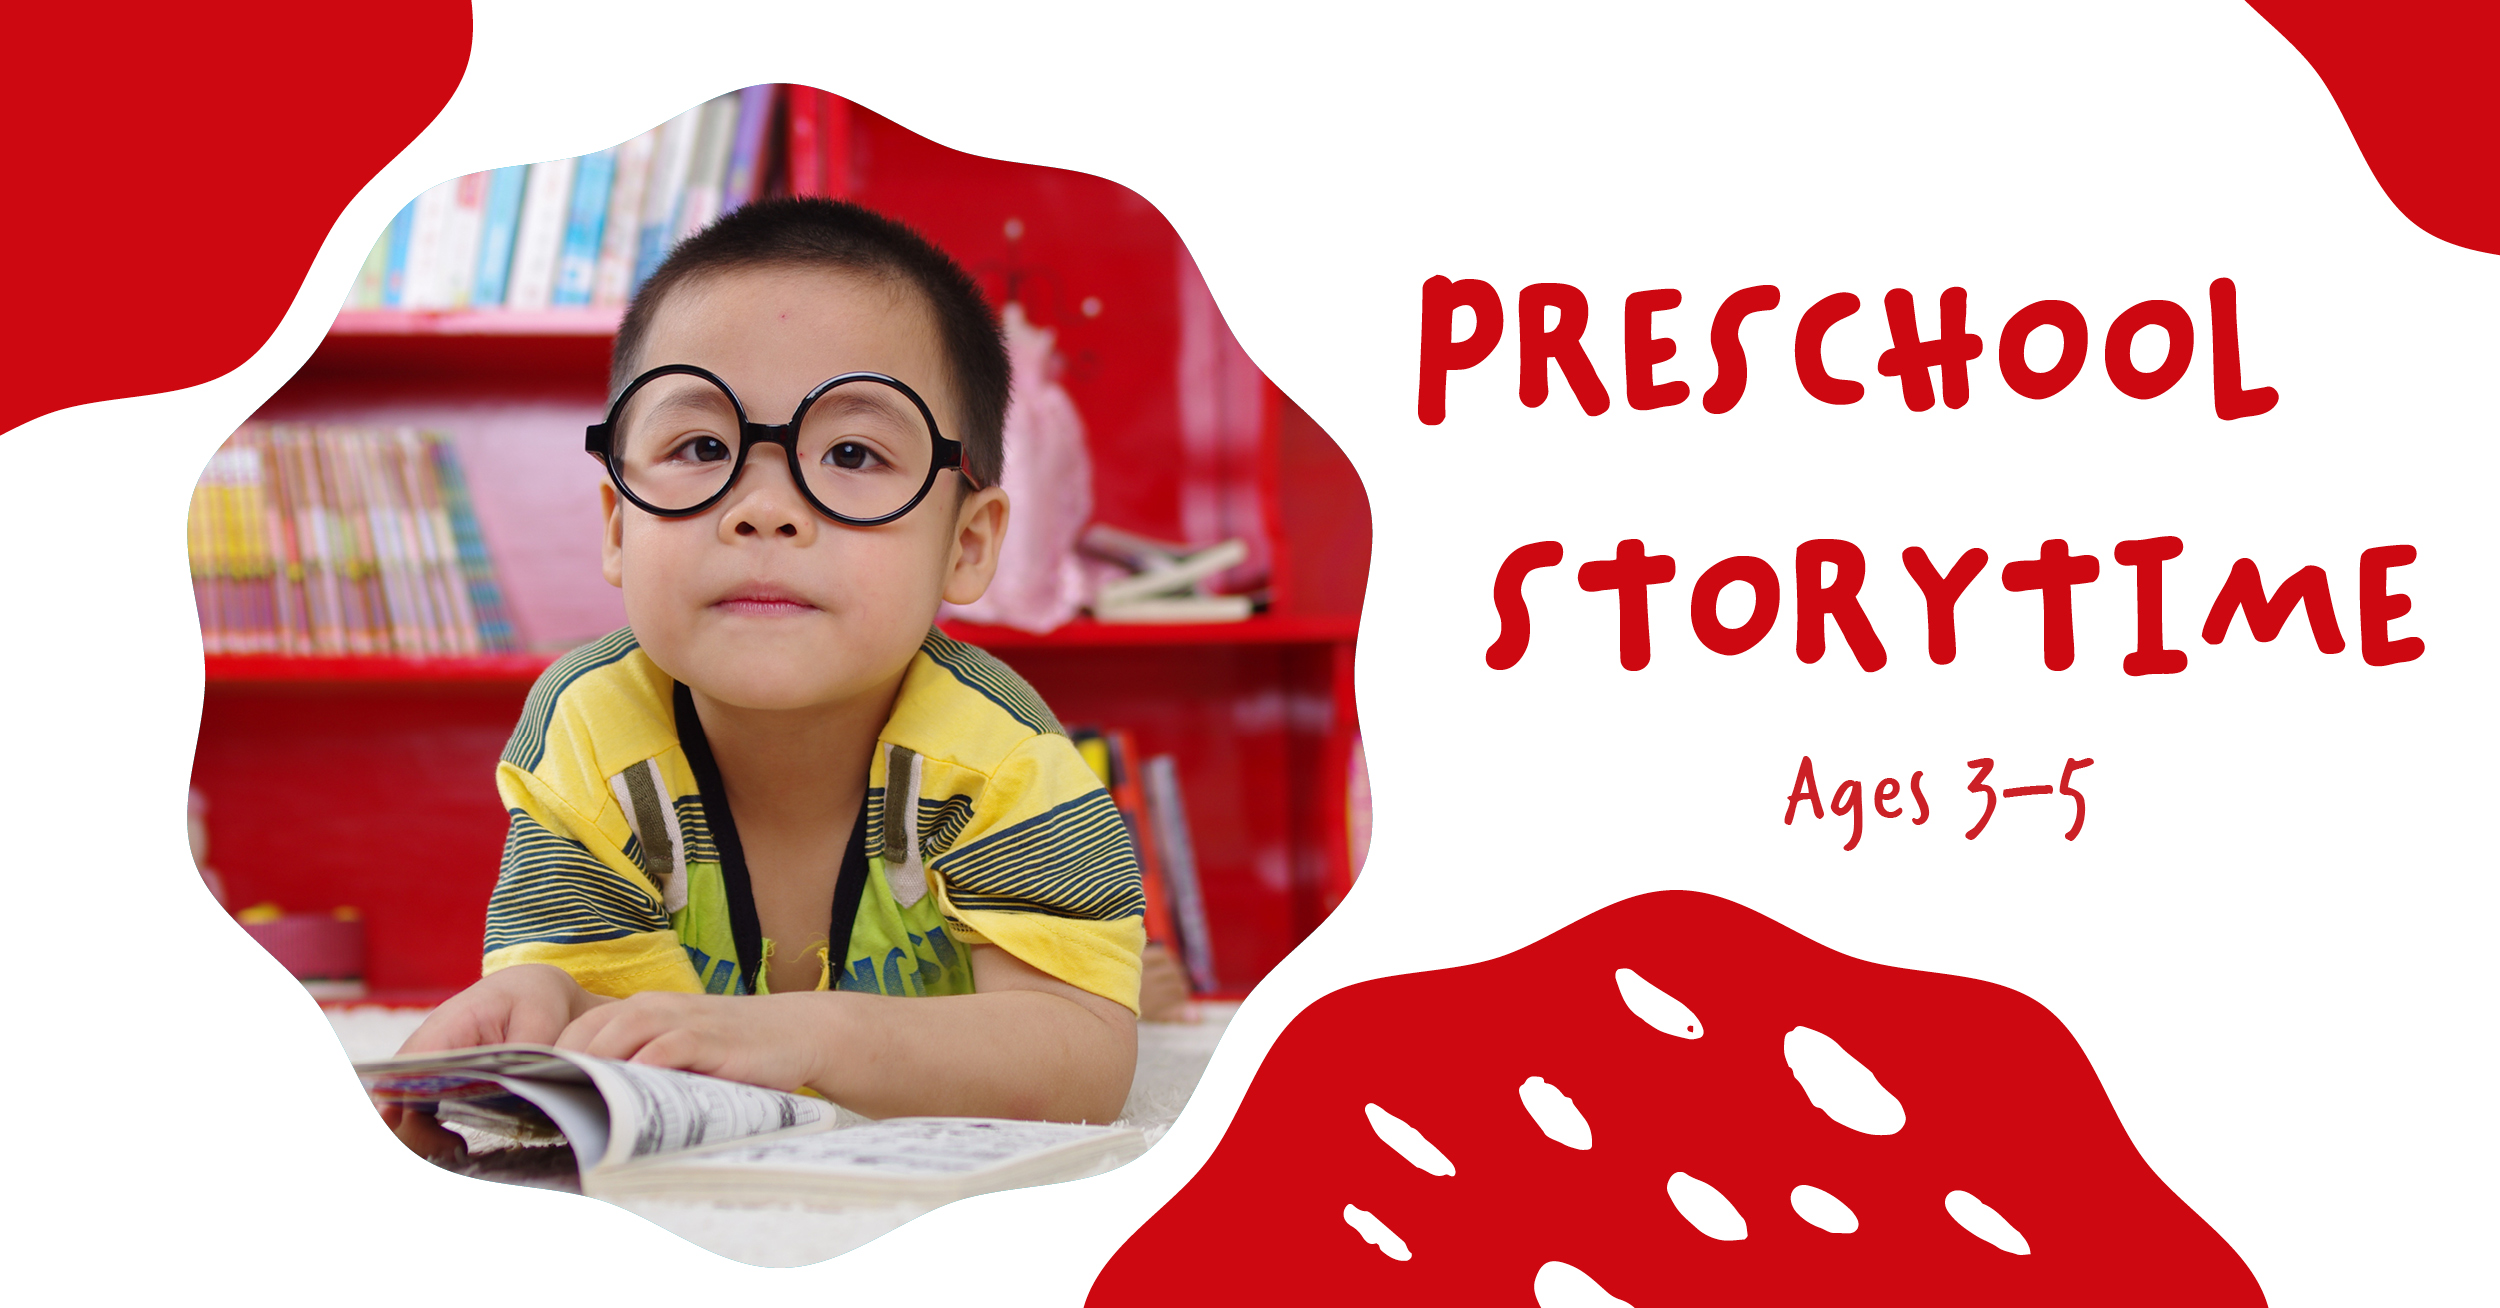 Preschooler in circle with red accents. Preschool Storytime ages 3 to 5